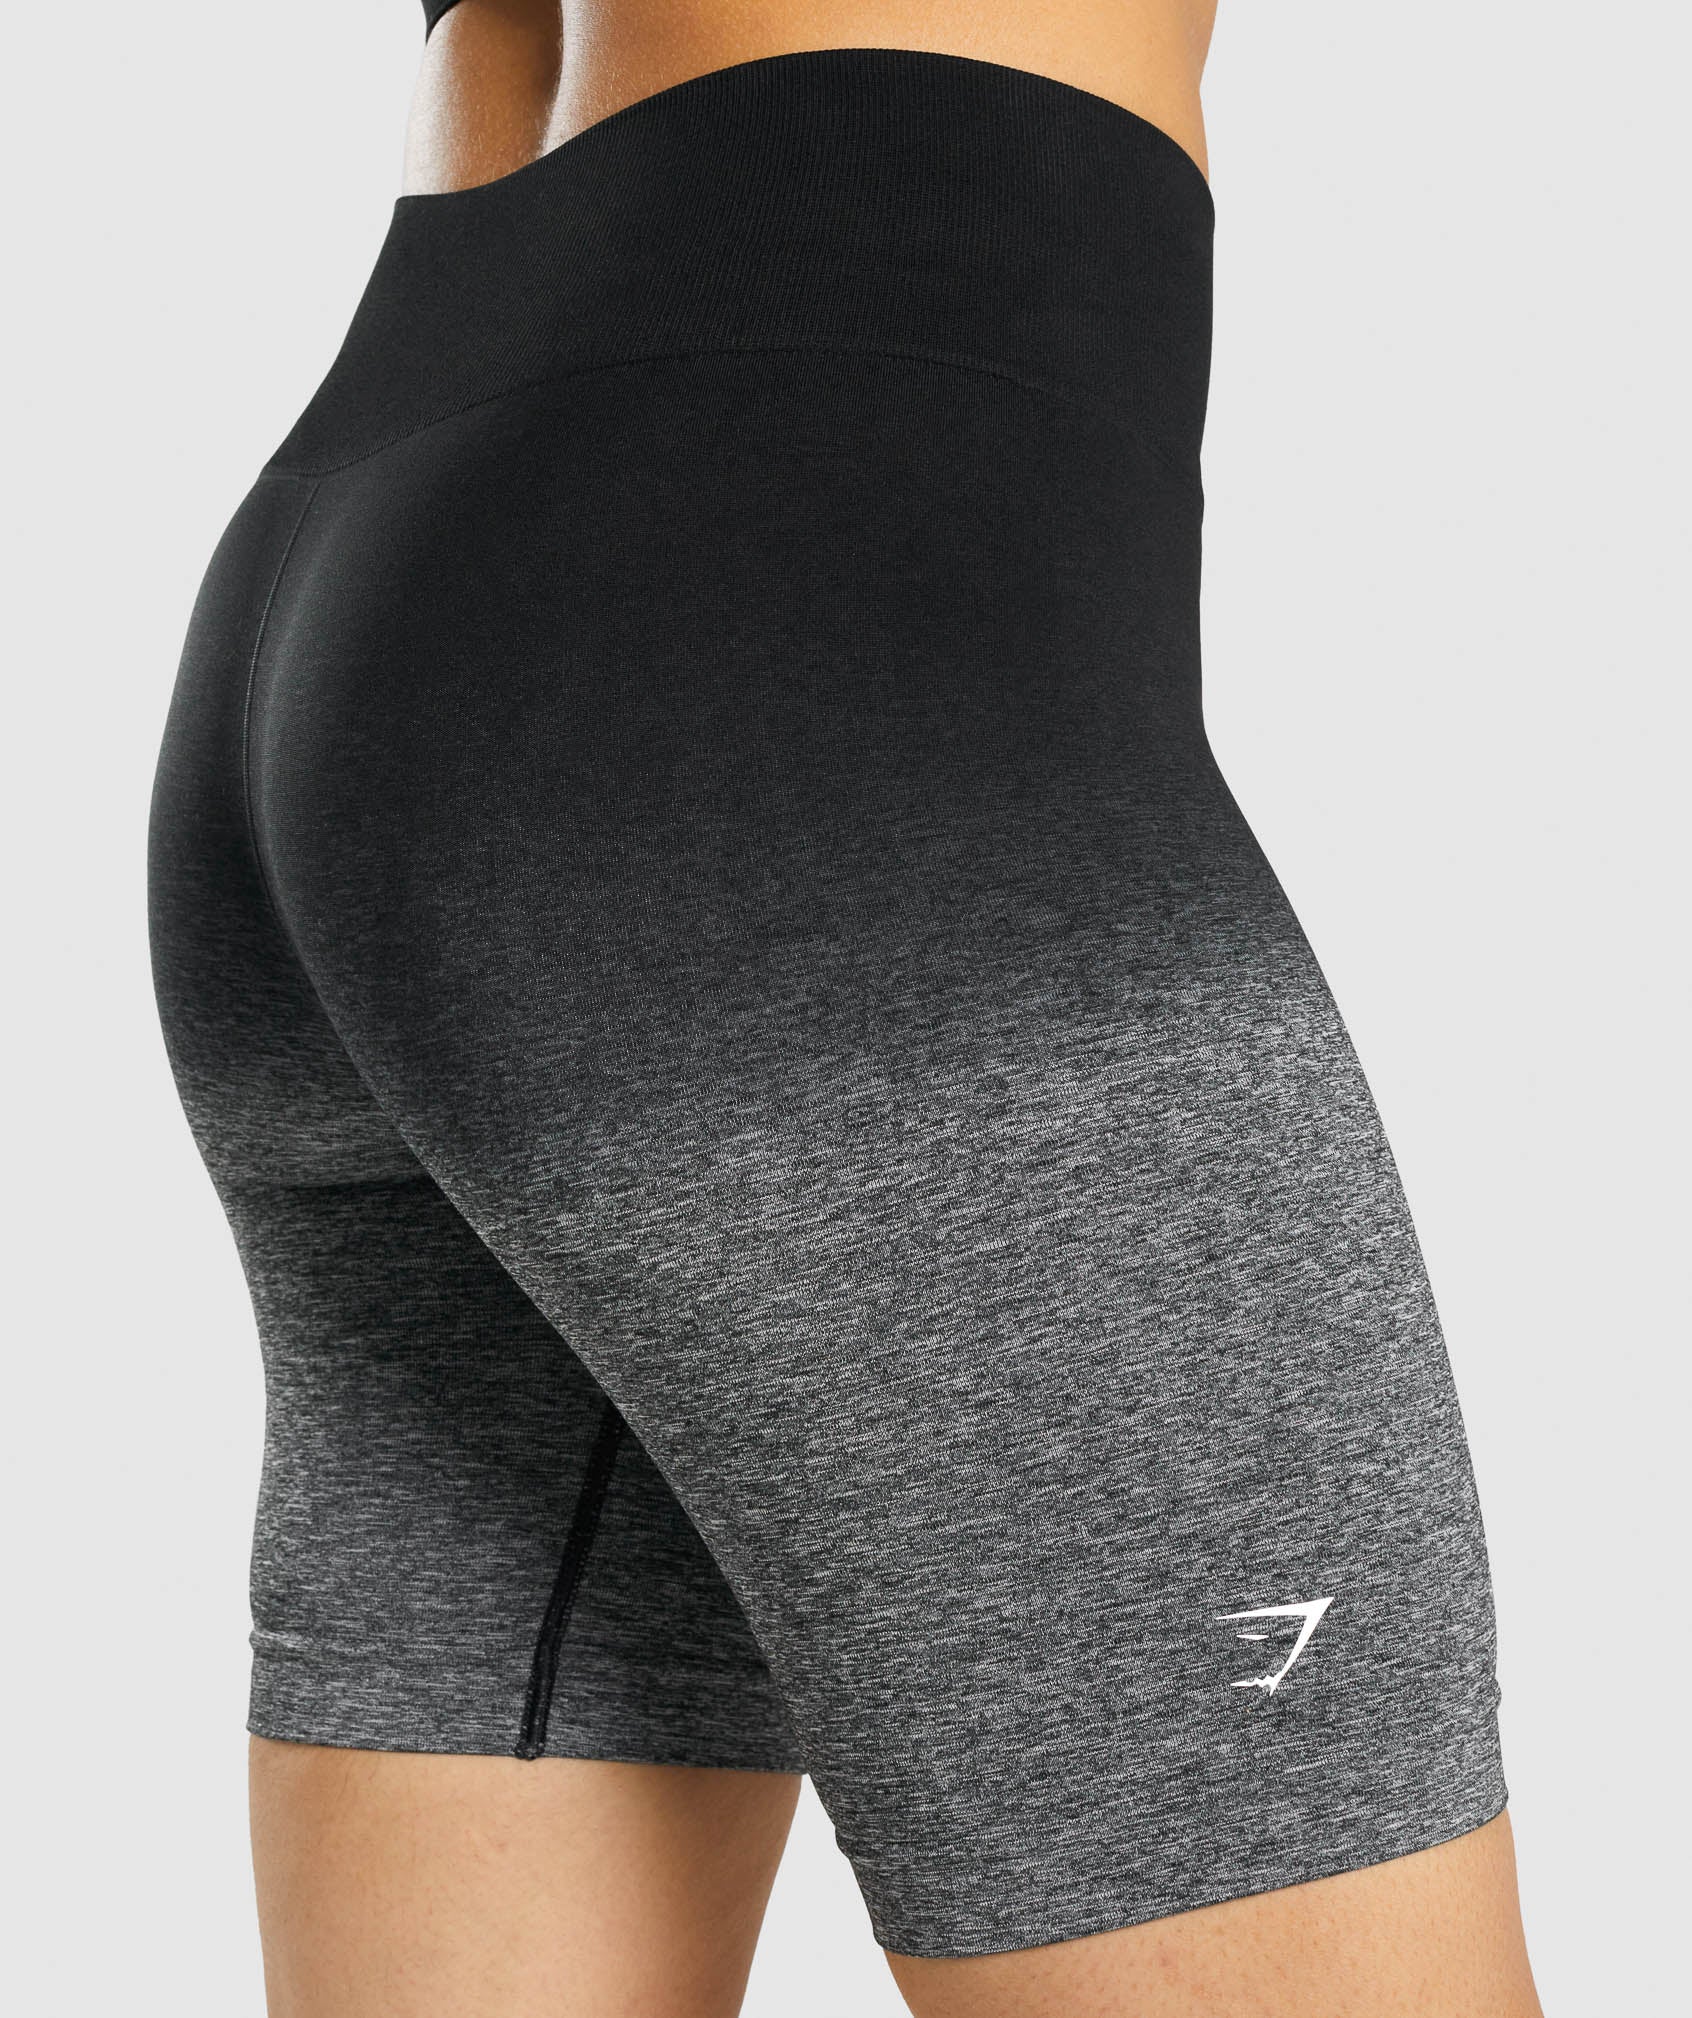 Adapt Ombre Seamless Shorts in Black/Black Marl - view 5